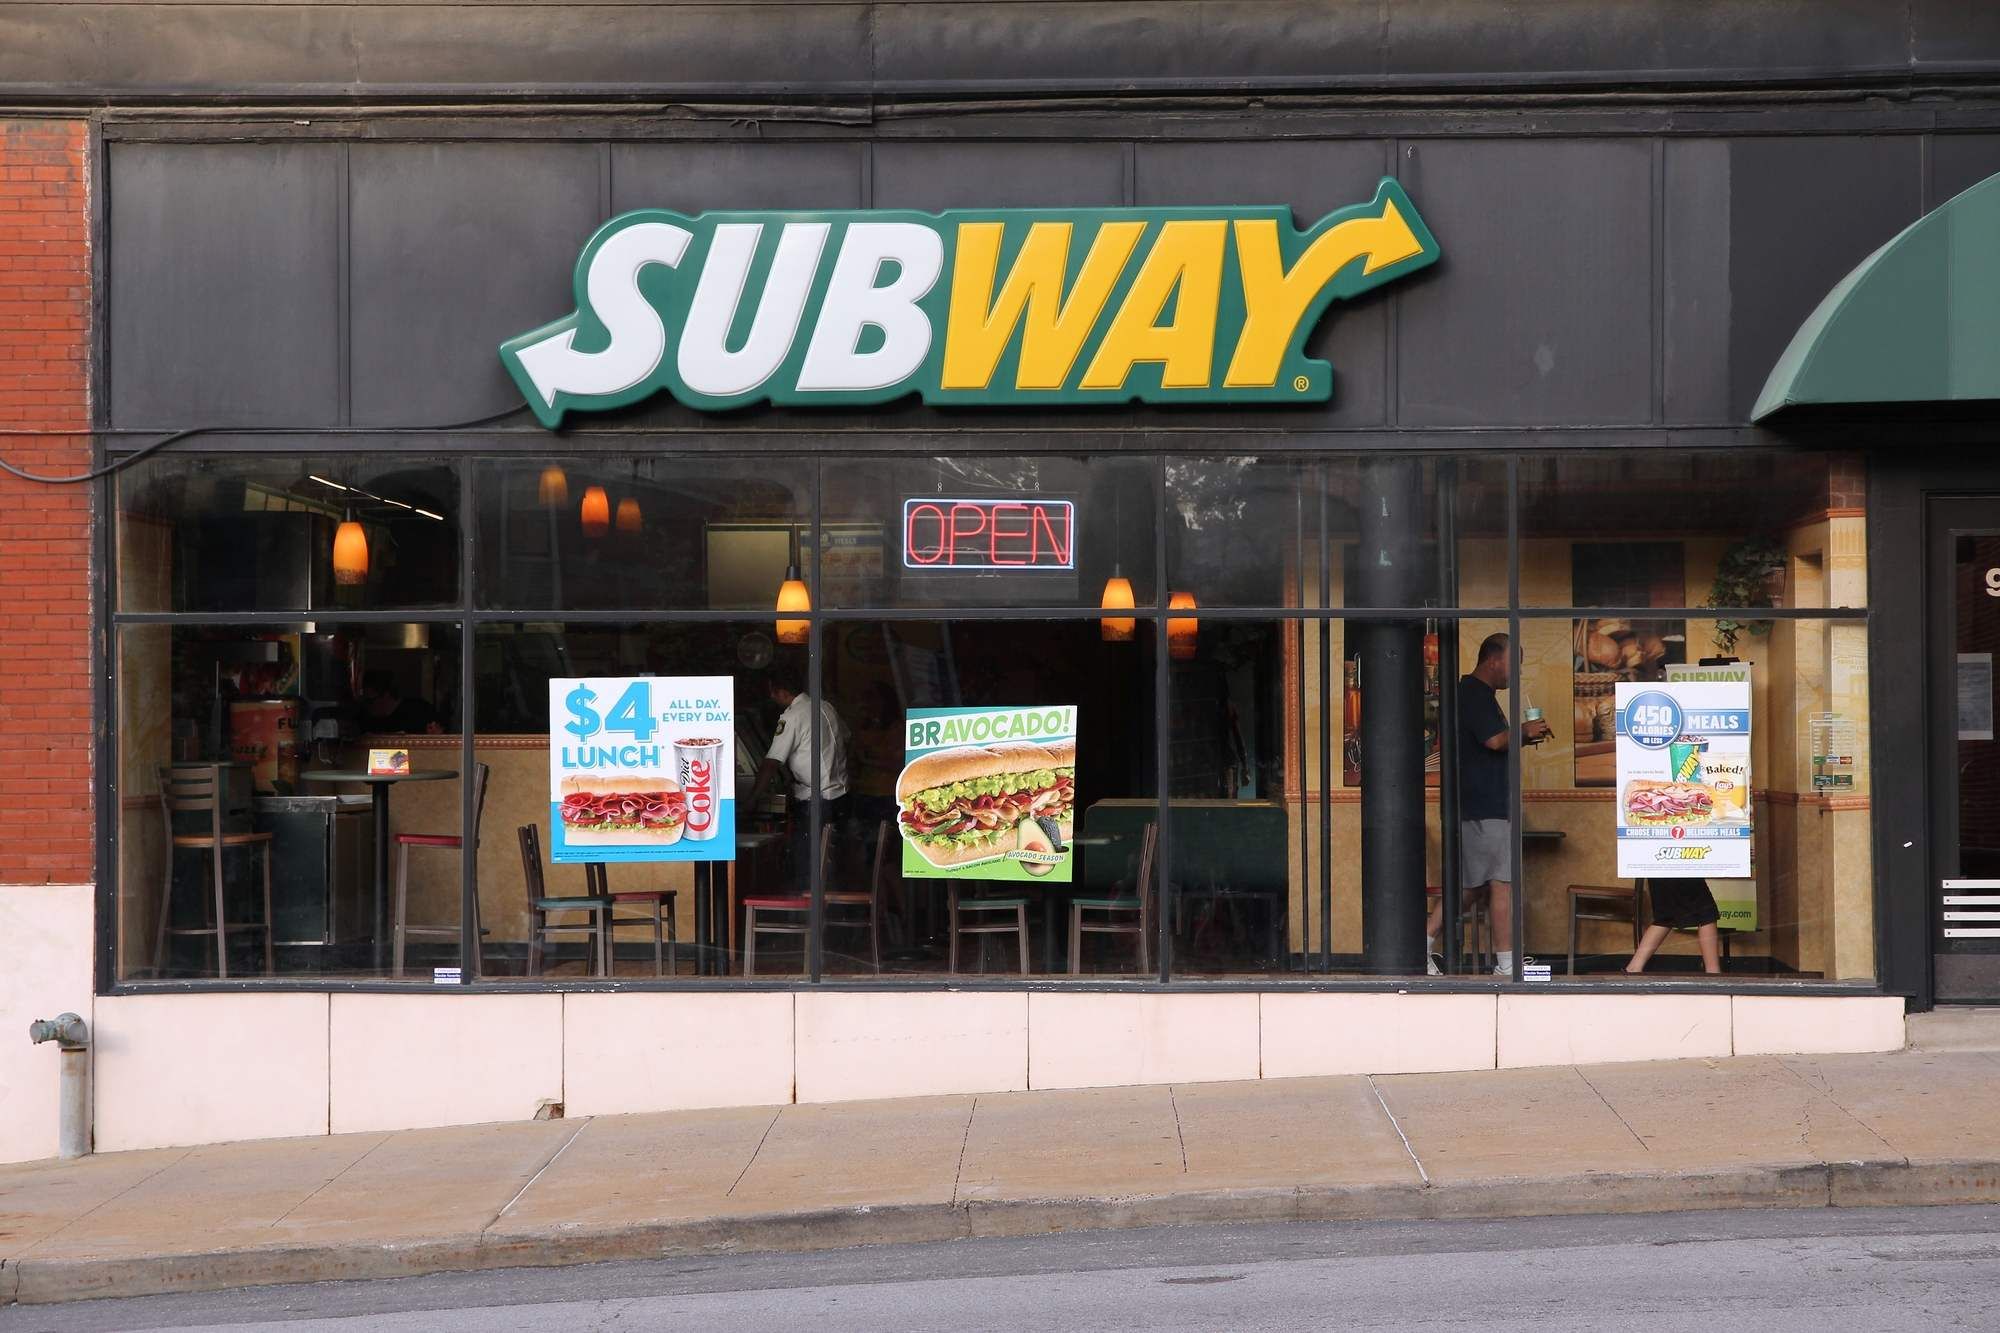 Subway regarding the class action lawsuit over real chicken